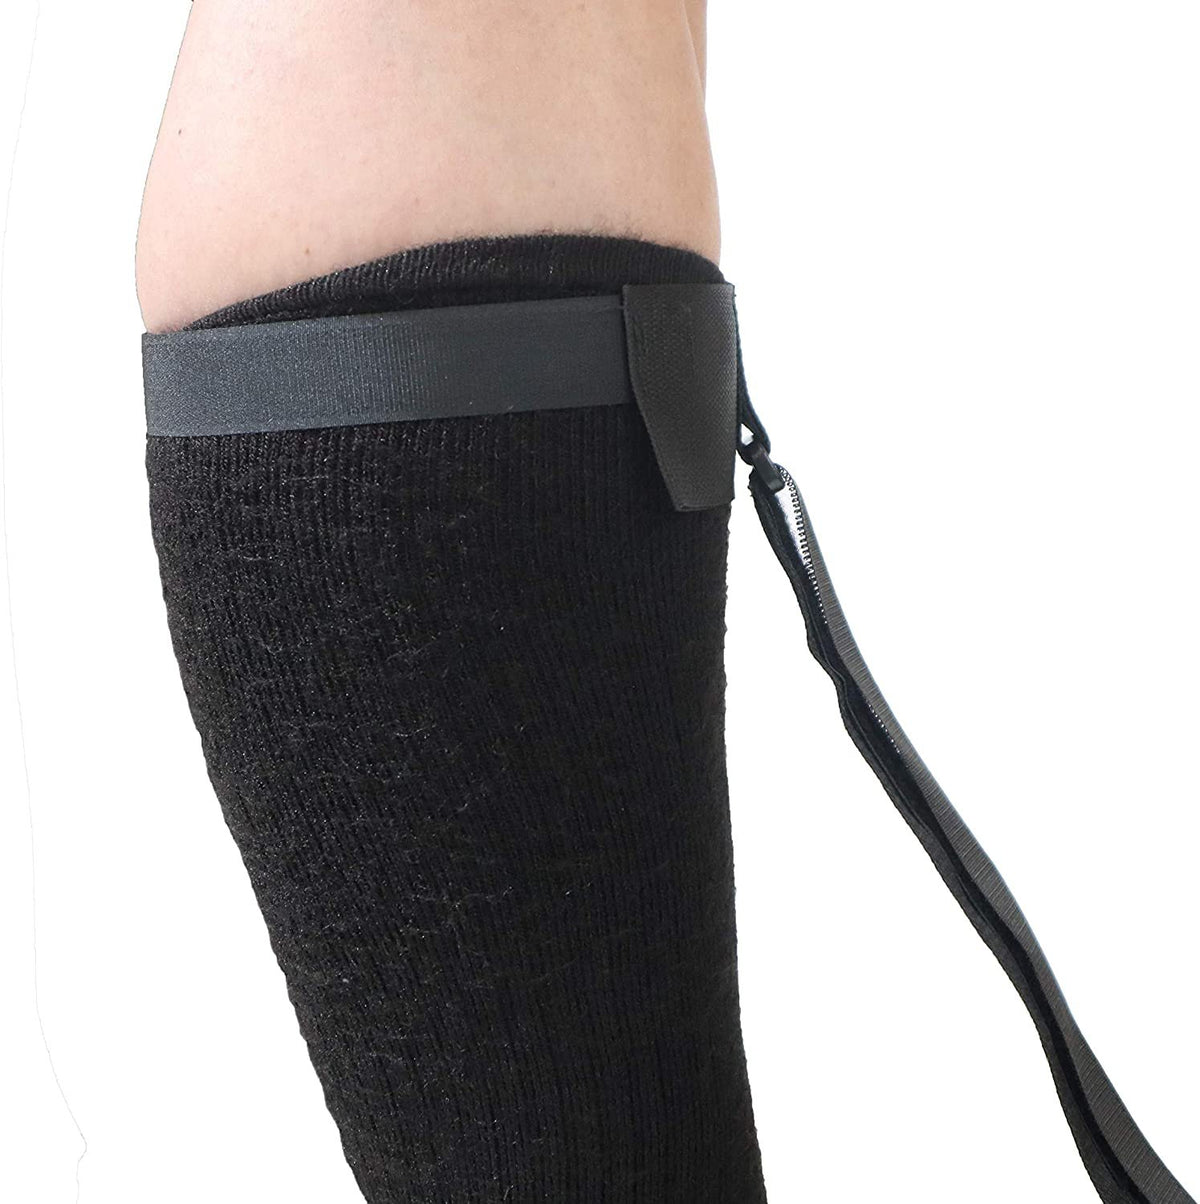 Plantar Fasciitis Stretch Night Sock - for Pain Relief from Plantar Fasciitis and Achilles Tendonitis - Black - XS - Mars Med Supply